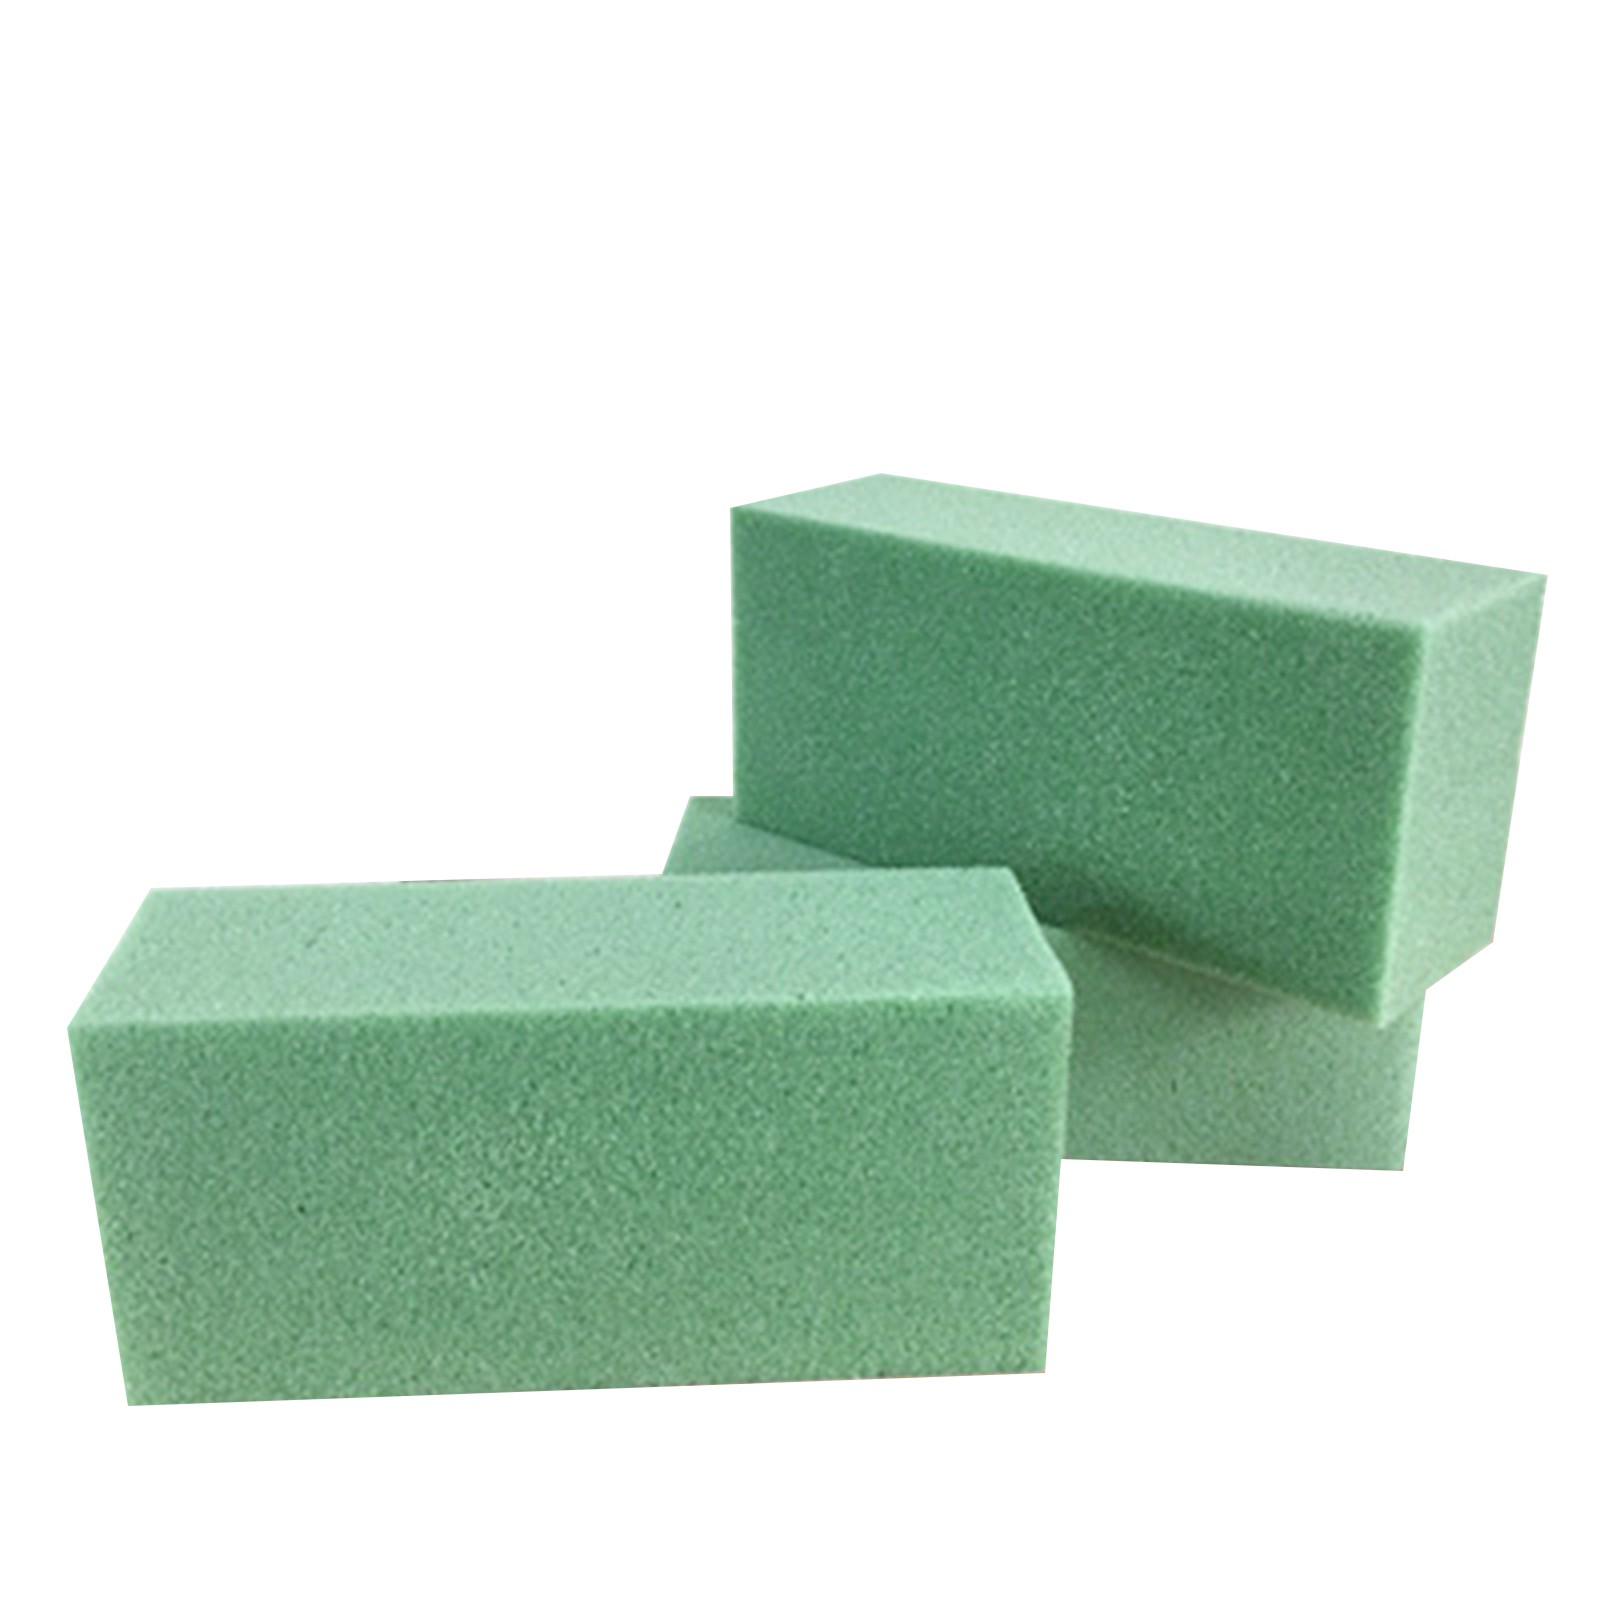 Trim Tool Square Floral Foam Blocks Dry Floral Foam For Artificial Flowers  Craft Project 